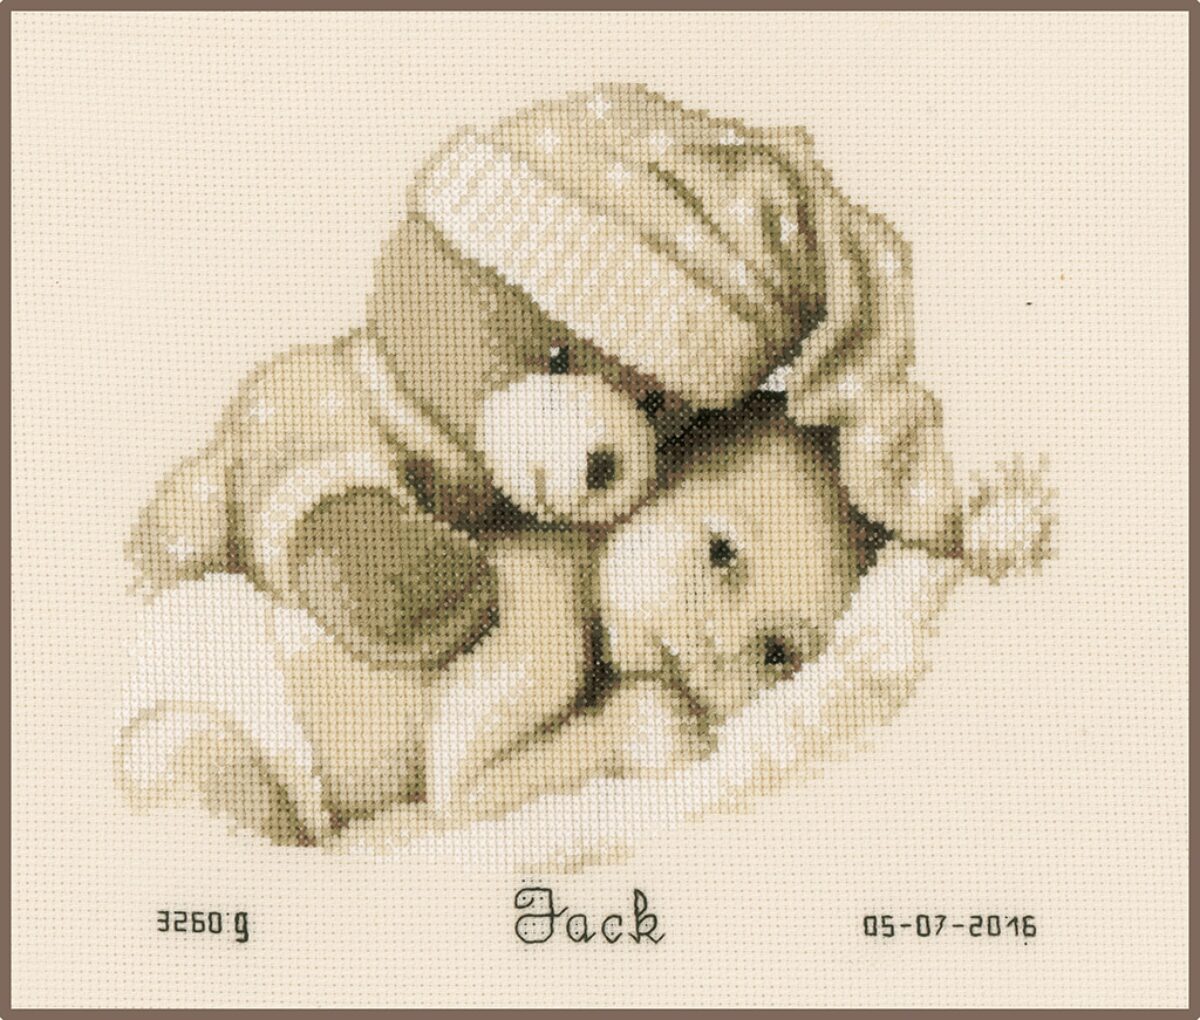 Vervaco cross stitch kit "Sweet bear", counted, DIY